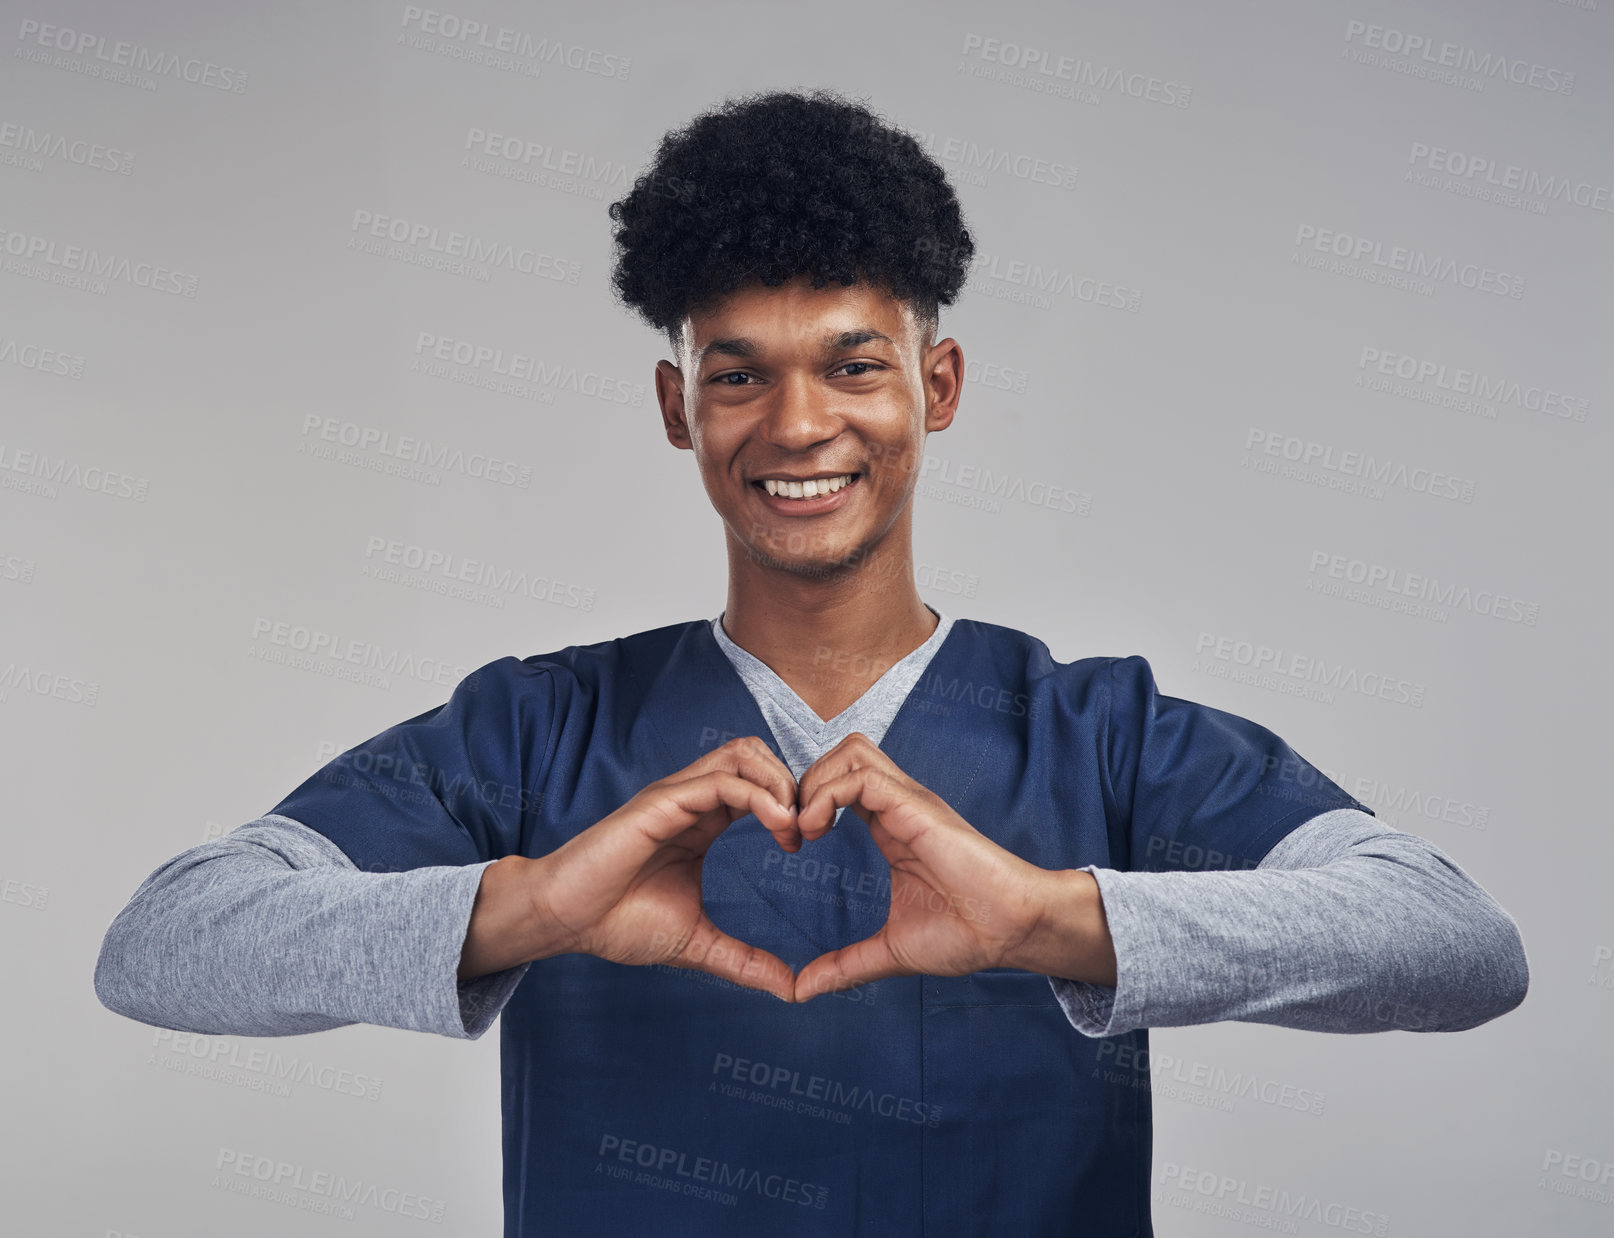 Buy stock photo Shot of a male nurse forming a heart shape with his hands while standing against a grey background